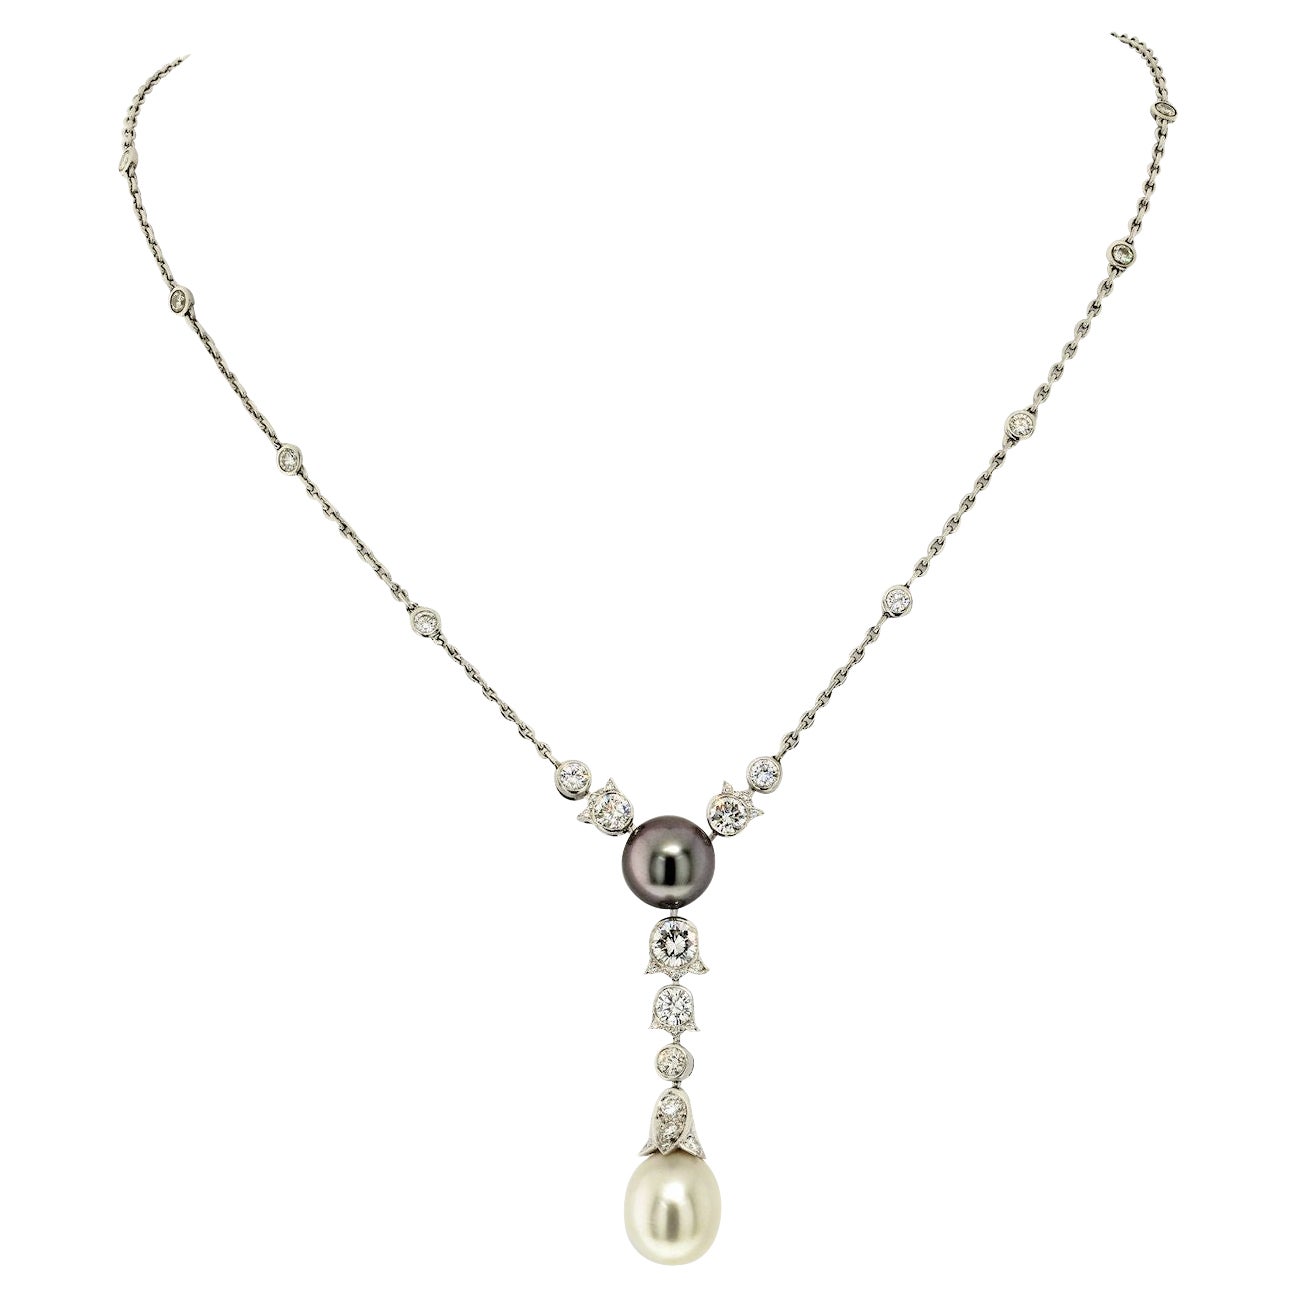 Cartier 18K White Gold Pearl and Diamond Drop Pendant Necklace